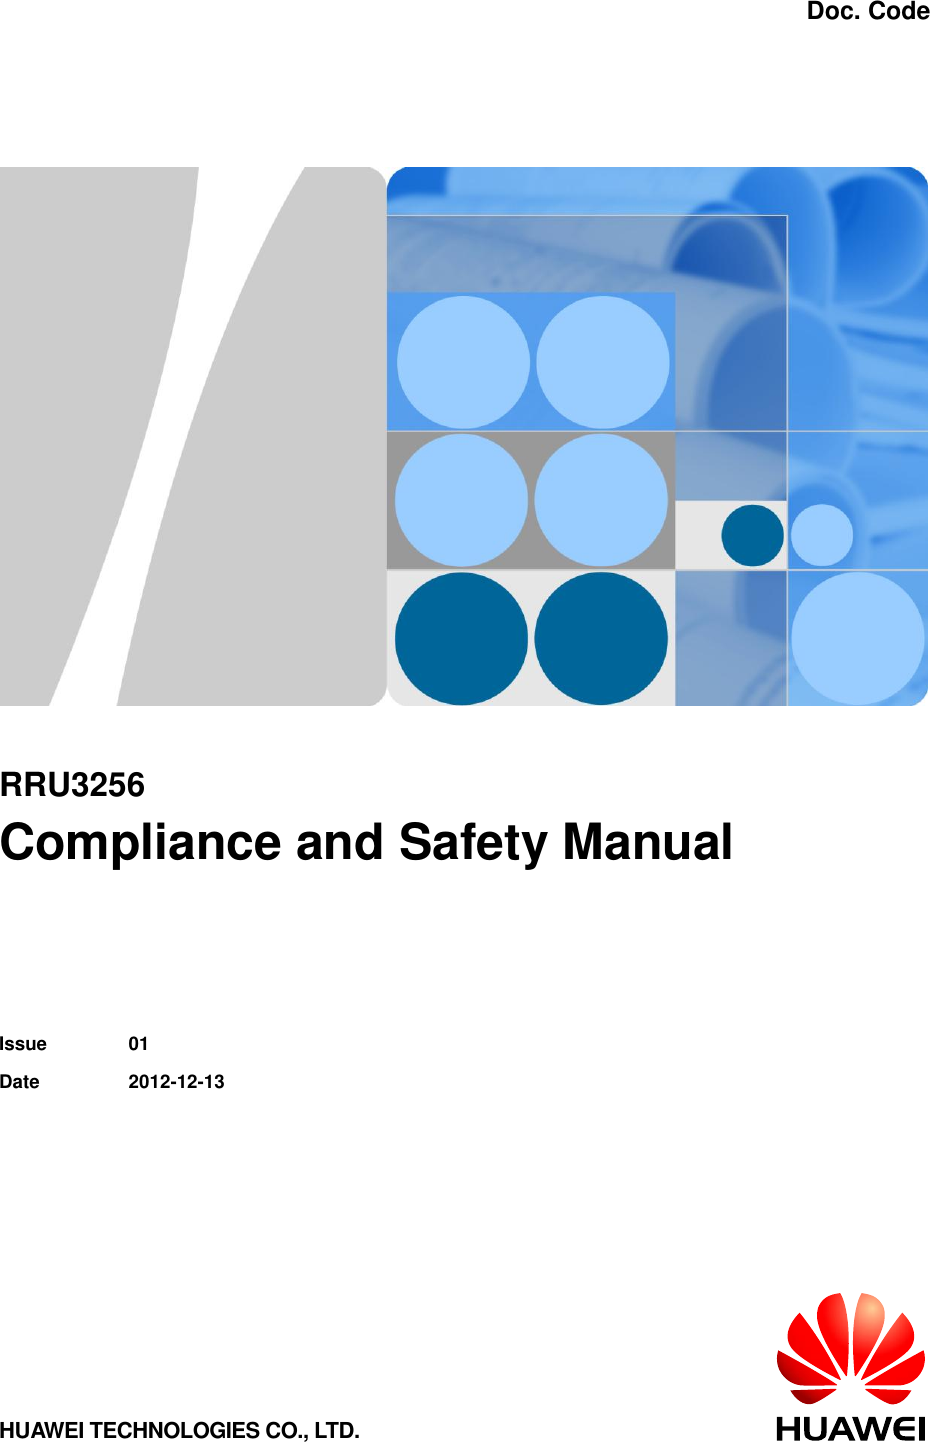    Doc. Code    RRU3256 Compliance and Safety Manual   Issue 01 Date 2012-12-13  HUAWEI TECHNOLOGIES CO., LTD.  